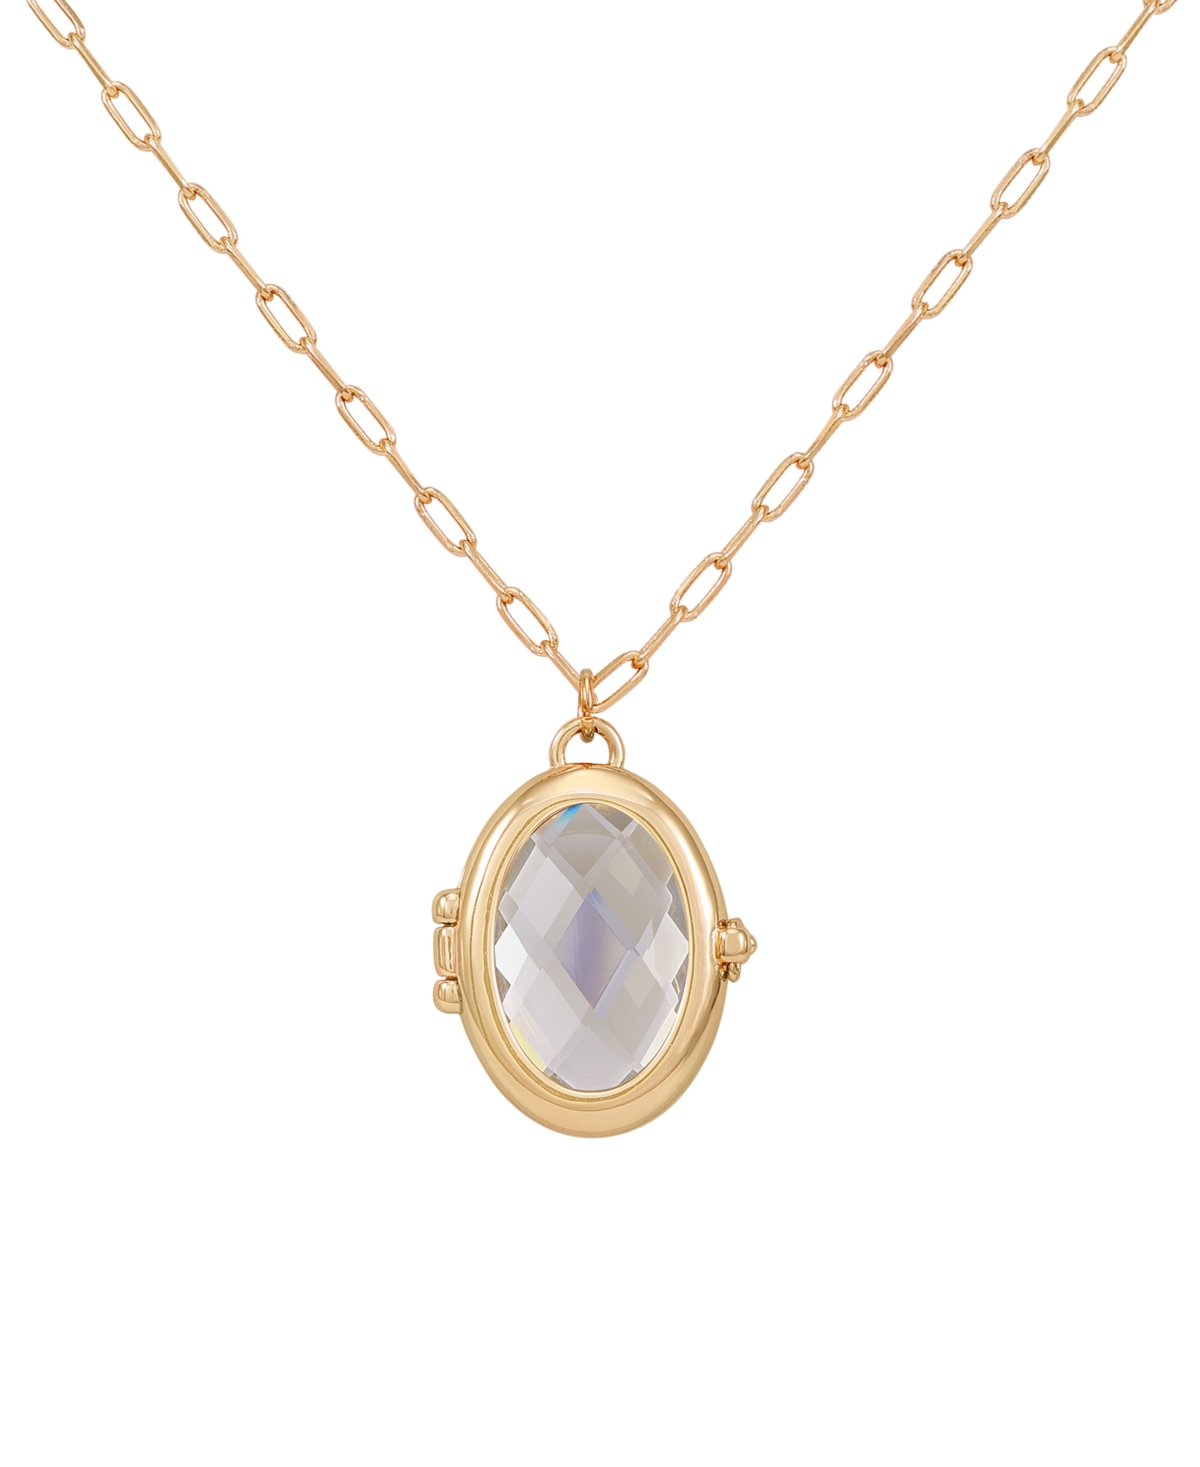 Guess Gold-tone Removable Stone Oval Locket Pendant Necklace, 18" + 3" Extender In Whtopal